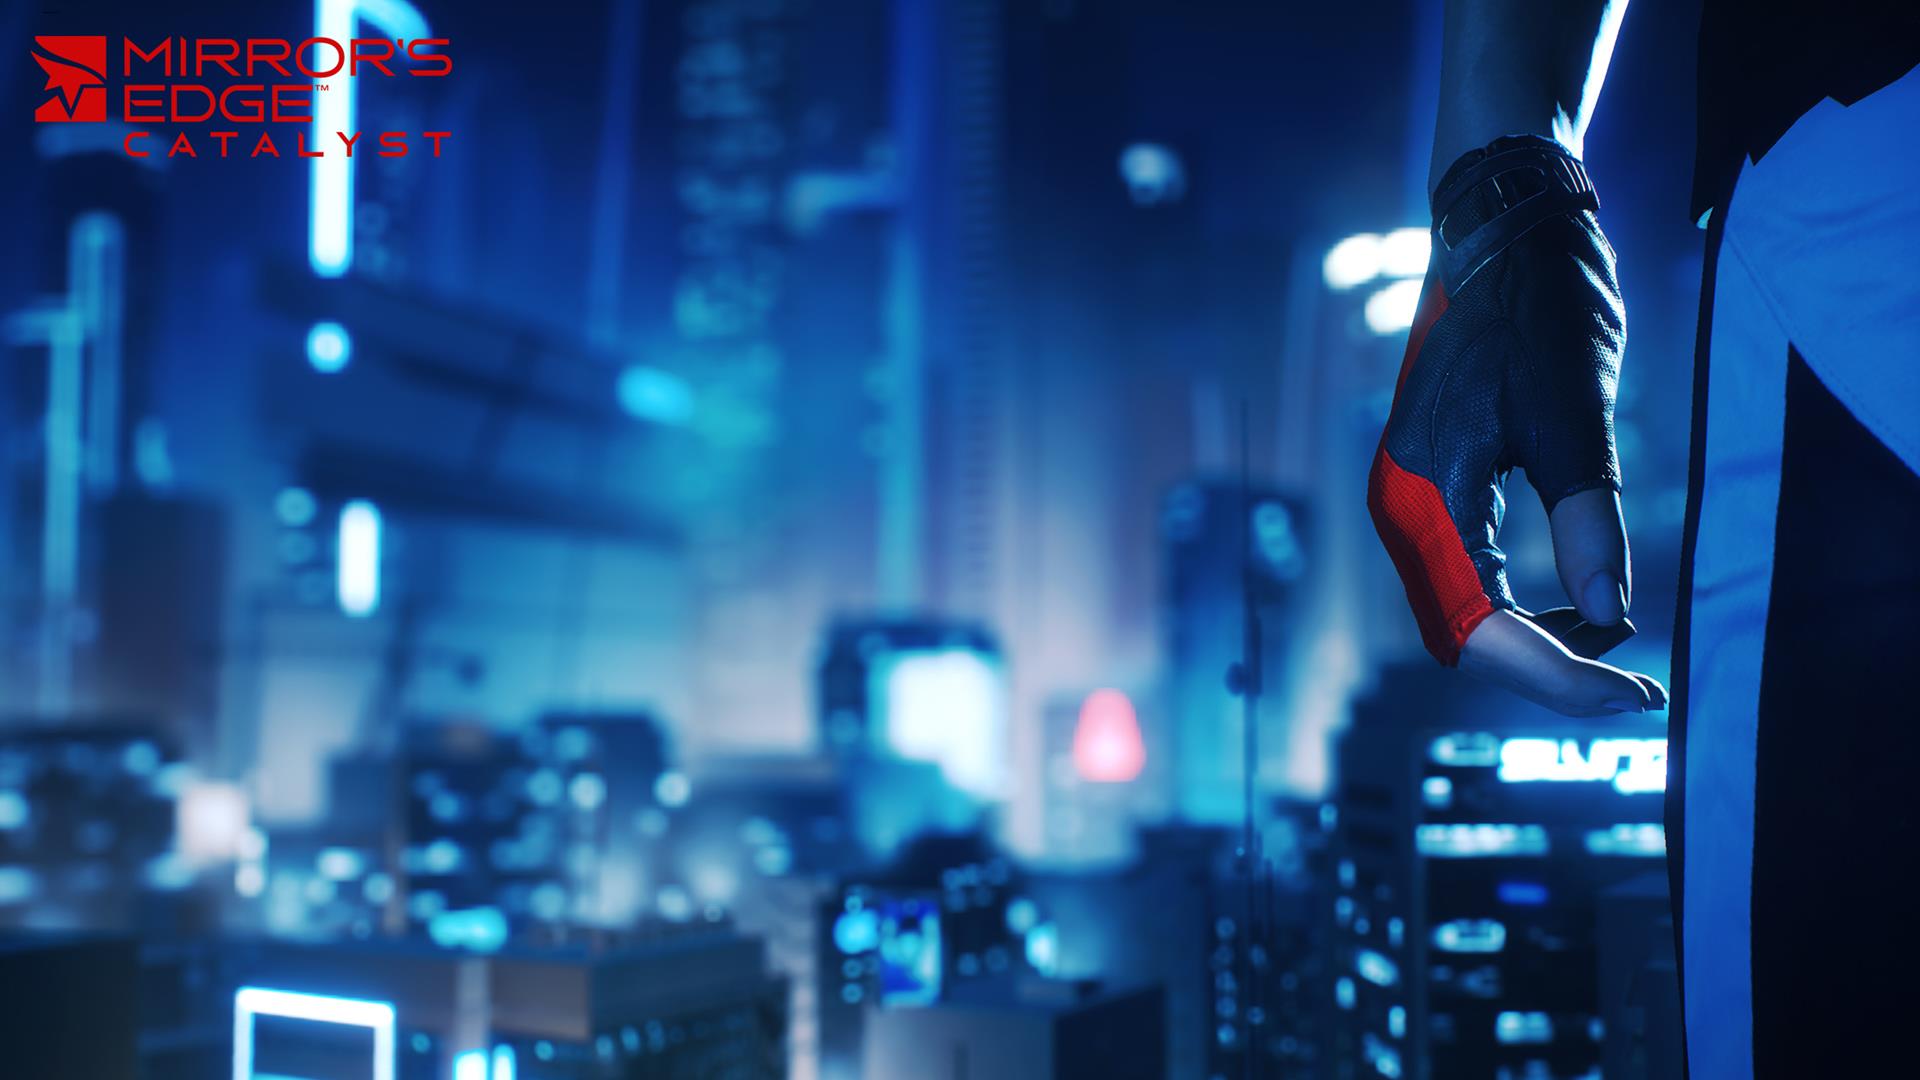 Mirror S Edge Catalyst Developer Dice Has Deicided To Drop Shooting